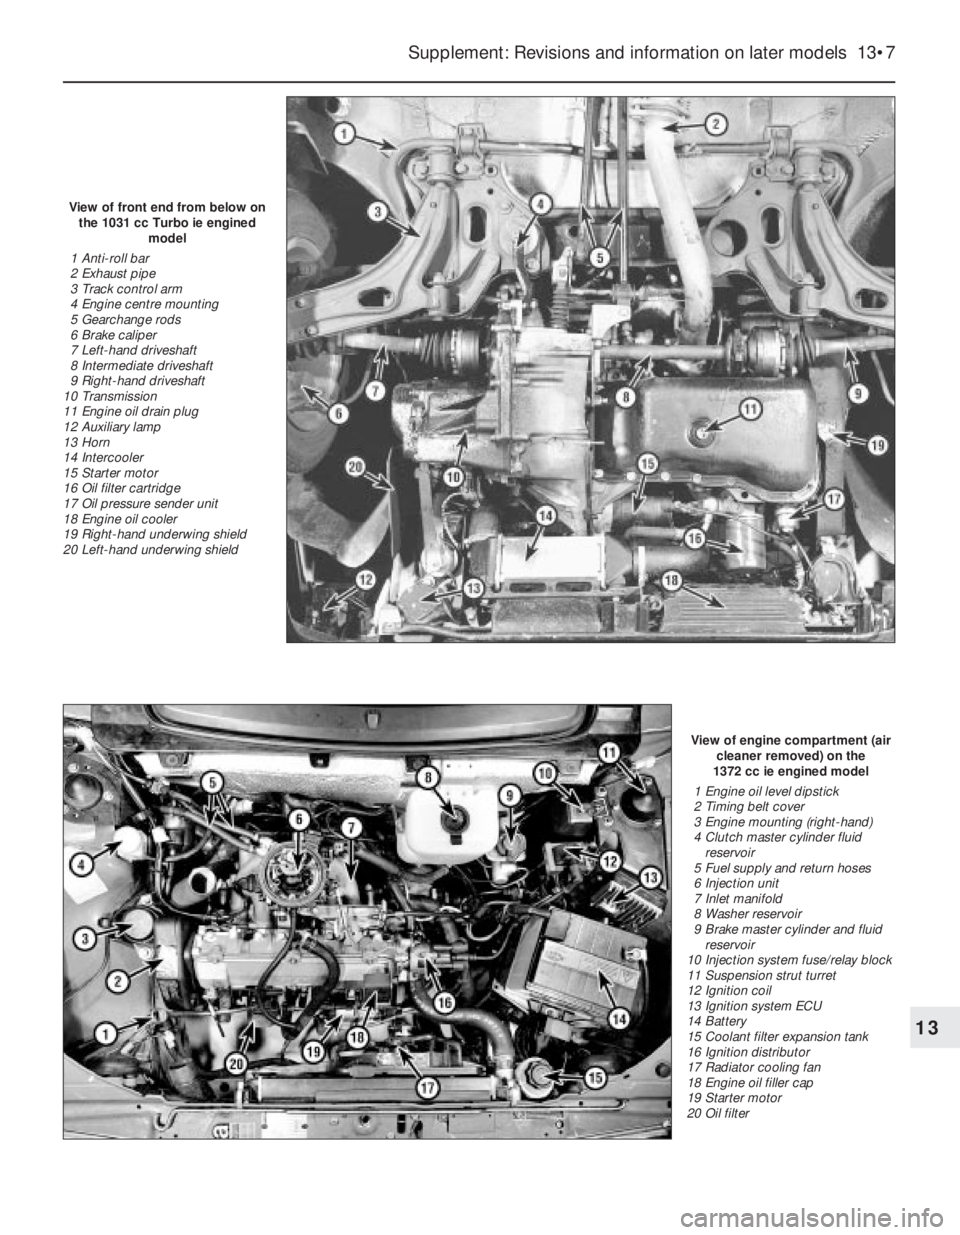 FIAT UNO 1983  Service Repair Manual Supplement: Revisions and information on later models  13•7
View of engine compartment (air
cleaner removed) on the 
1372 cc ie engined model
1 Engine oil level dipstick
2 Timing belt cover
3 Engine